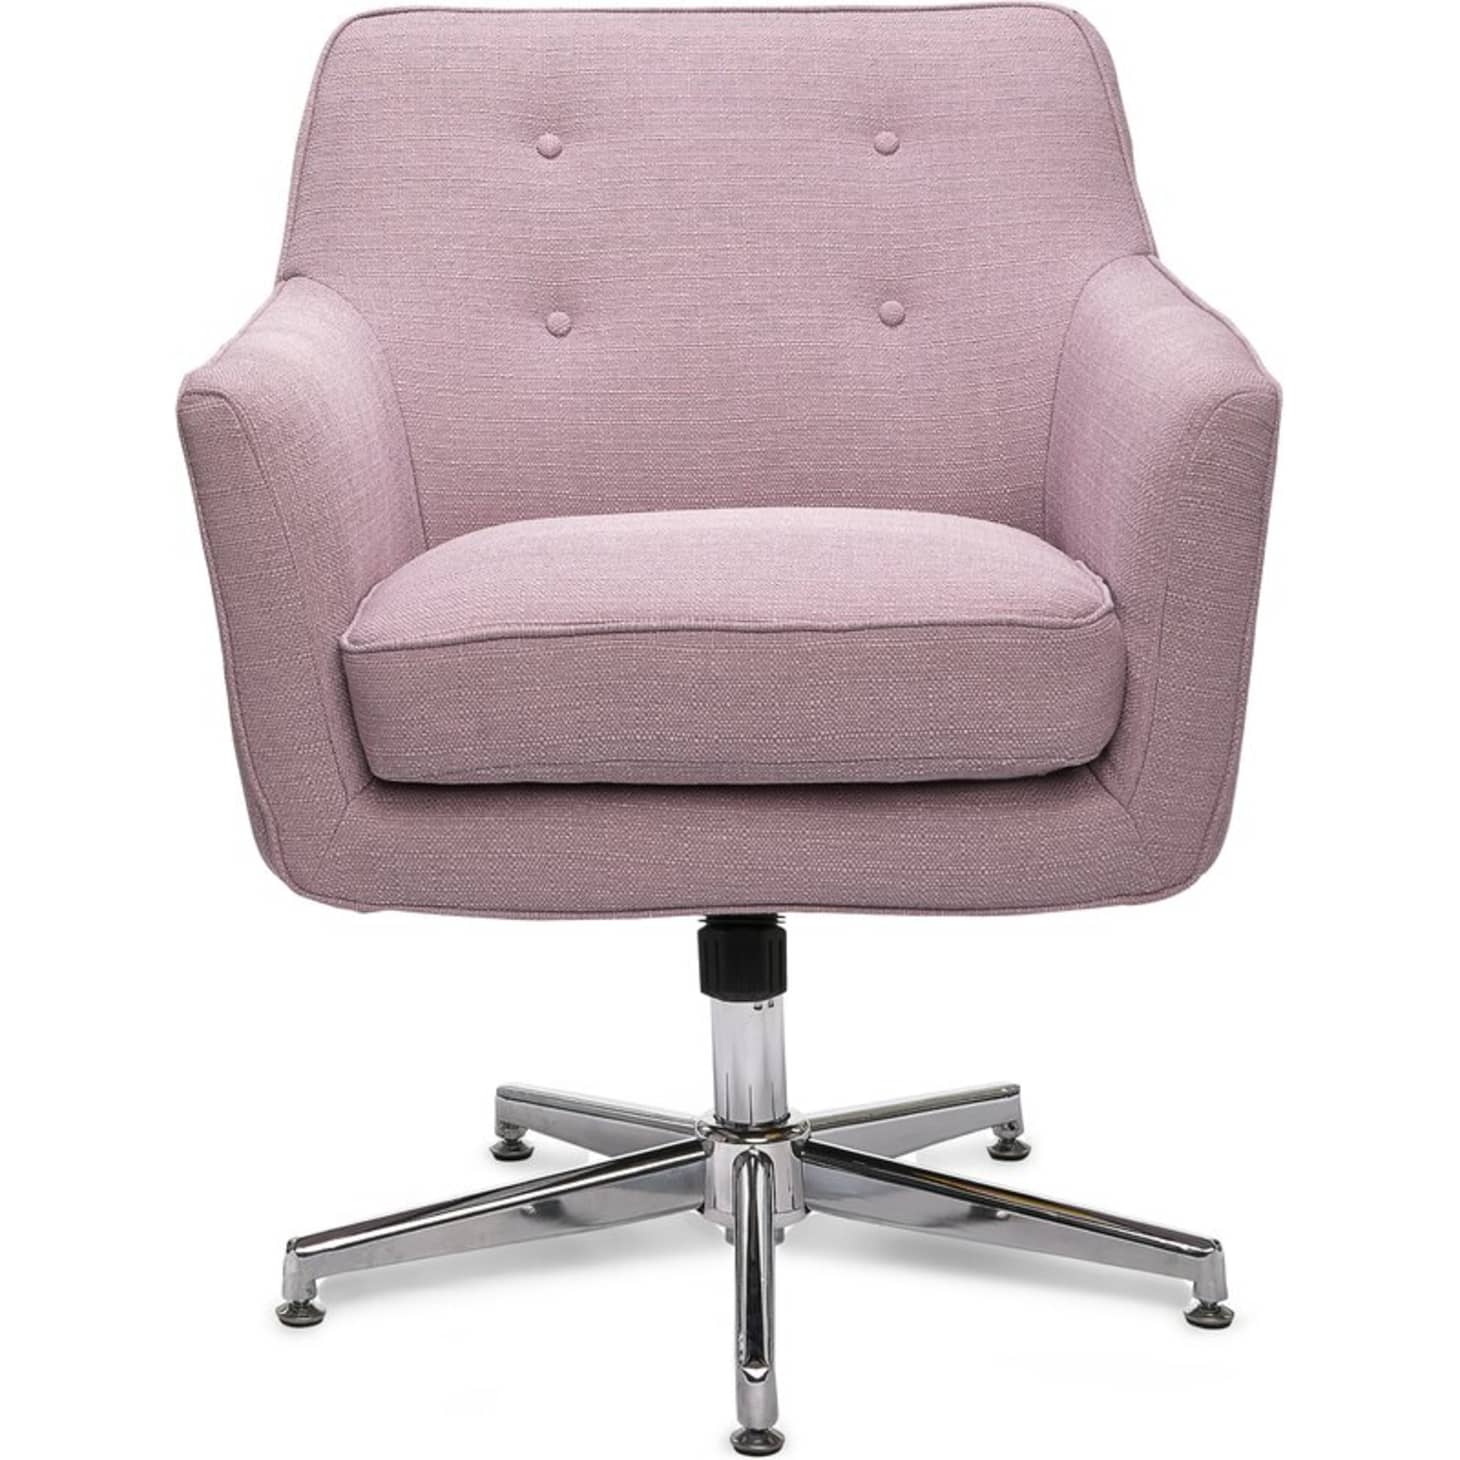 12 Comfortable & Stylish Office Chairs for Work-from-Home Desks